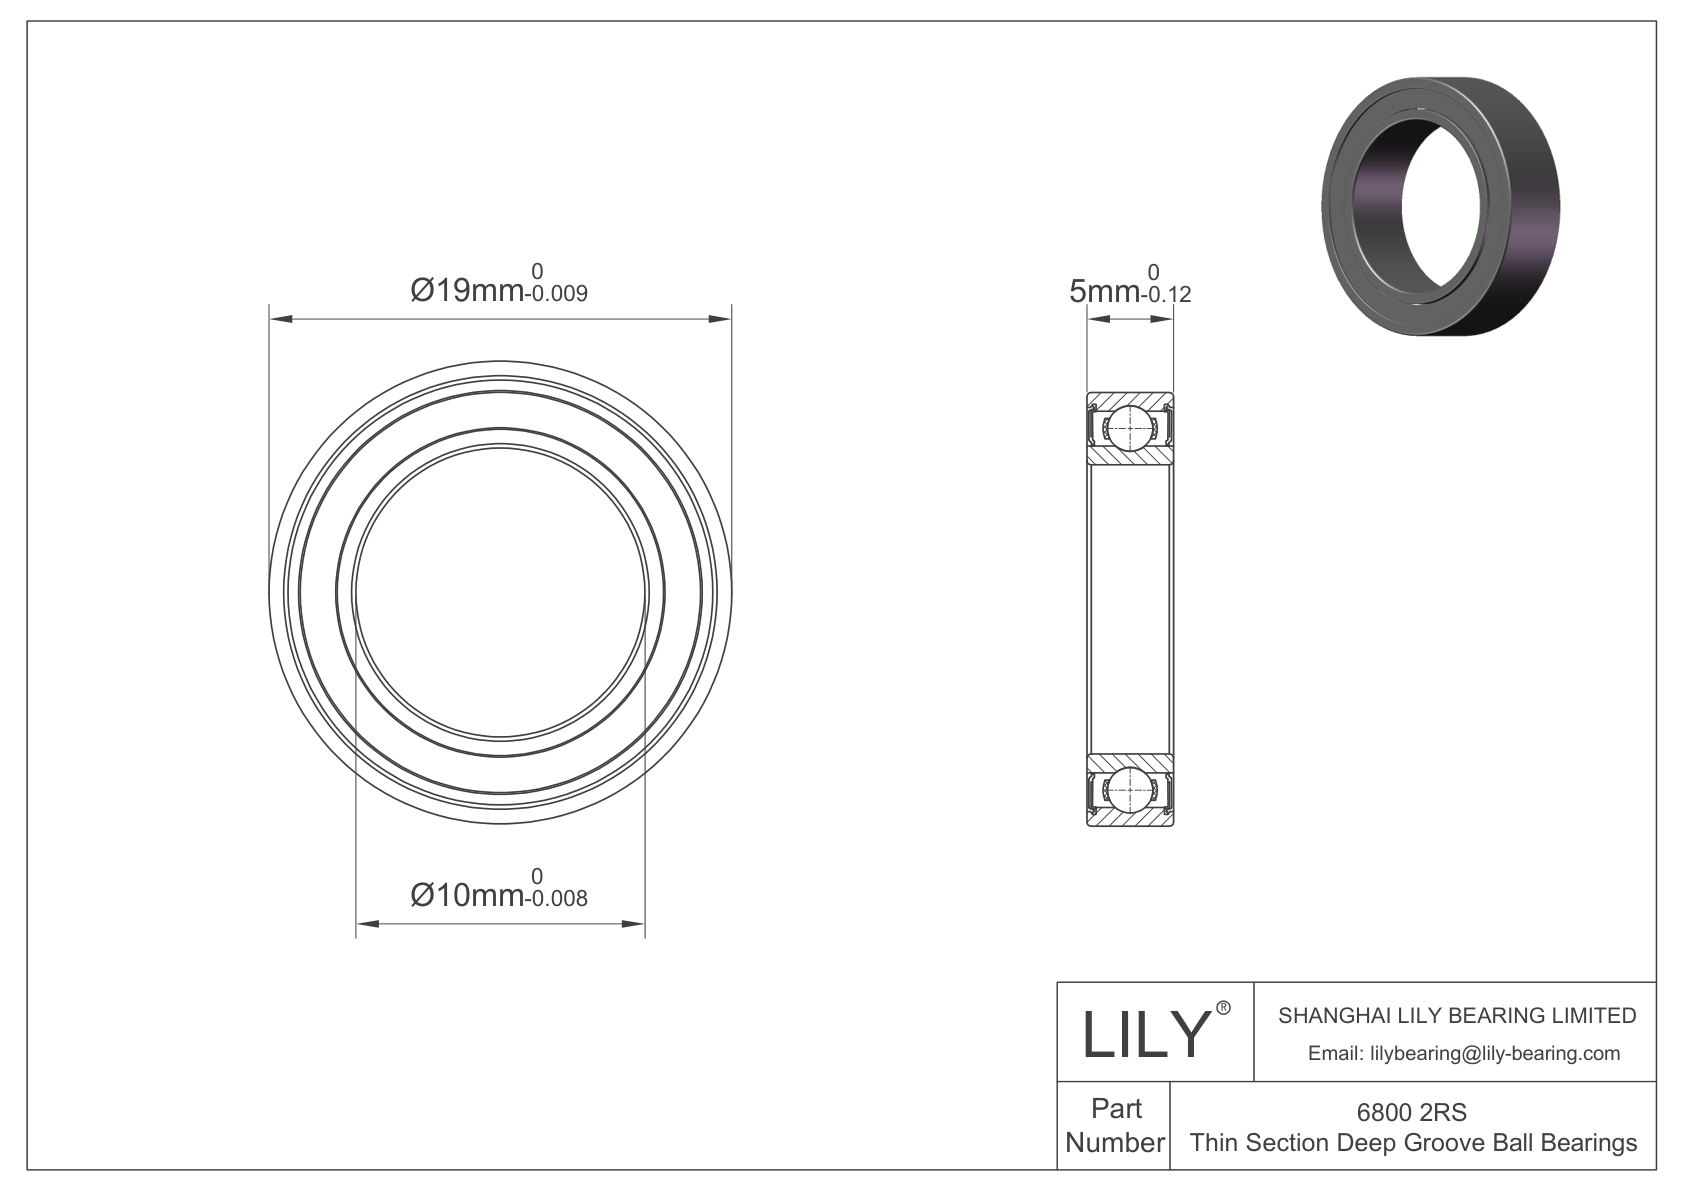 LILY-PUT680040-45 Outsourcing Polyurethane bearings cad drawing